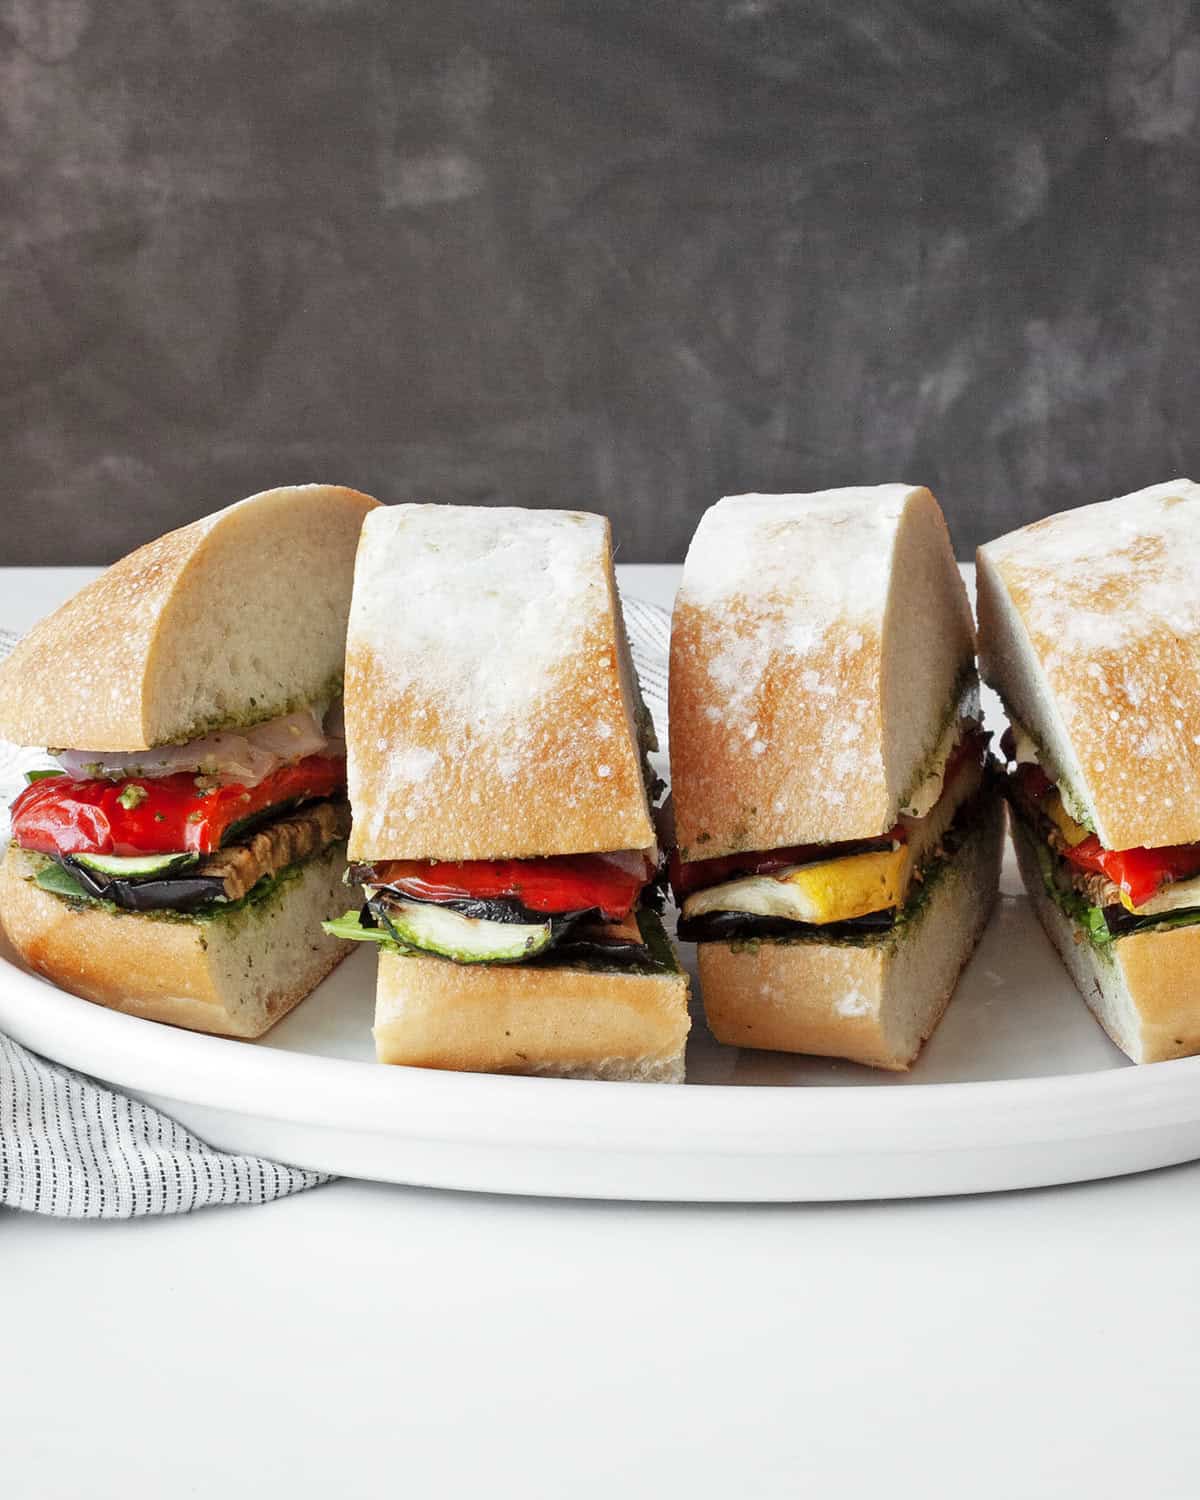 Grilled vegetable ciabatta sandwiches on a plate.